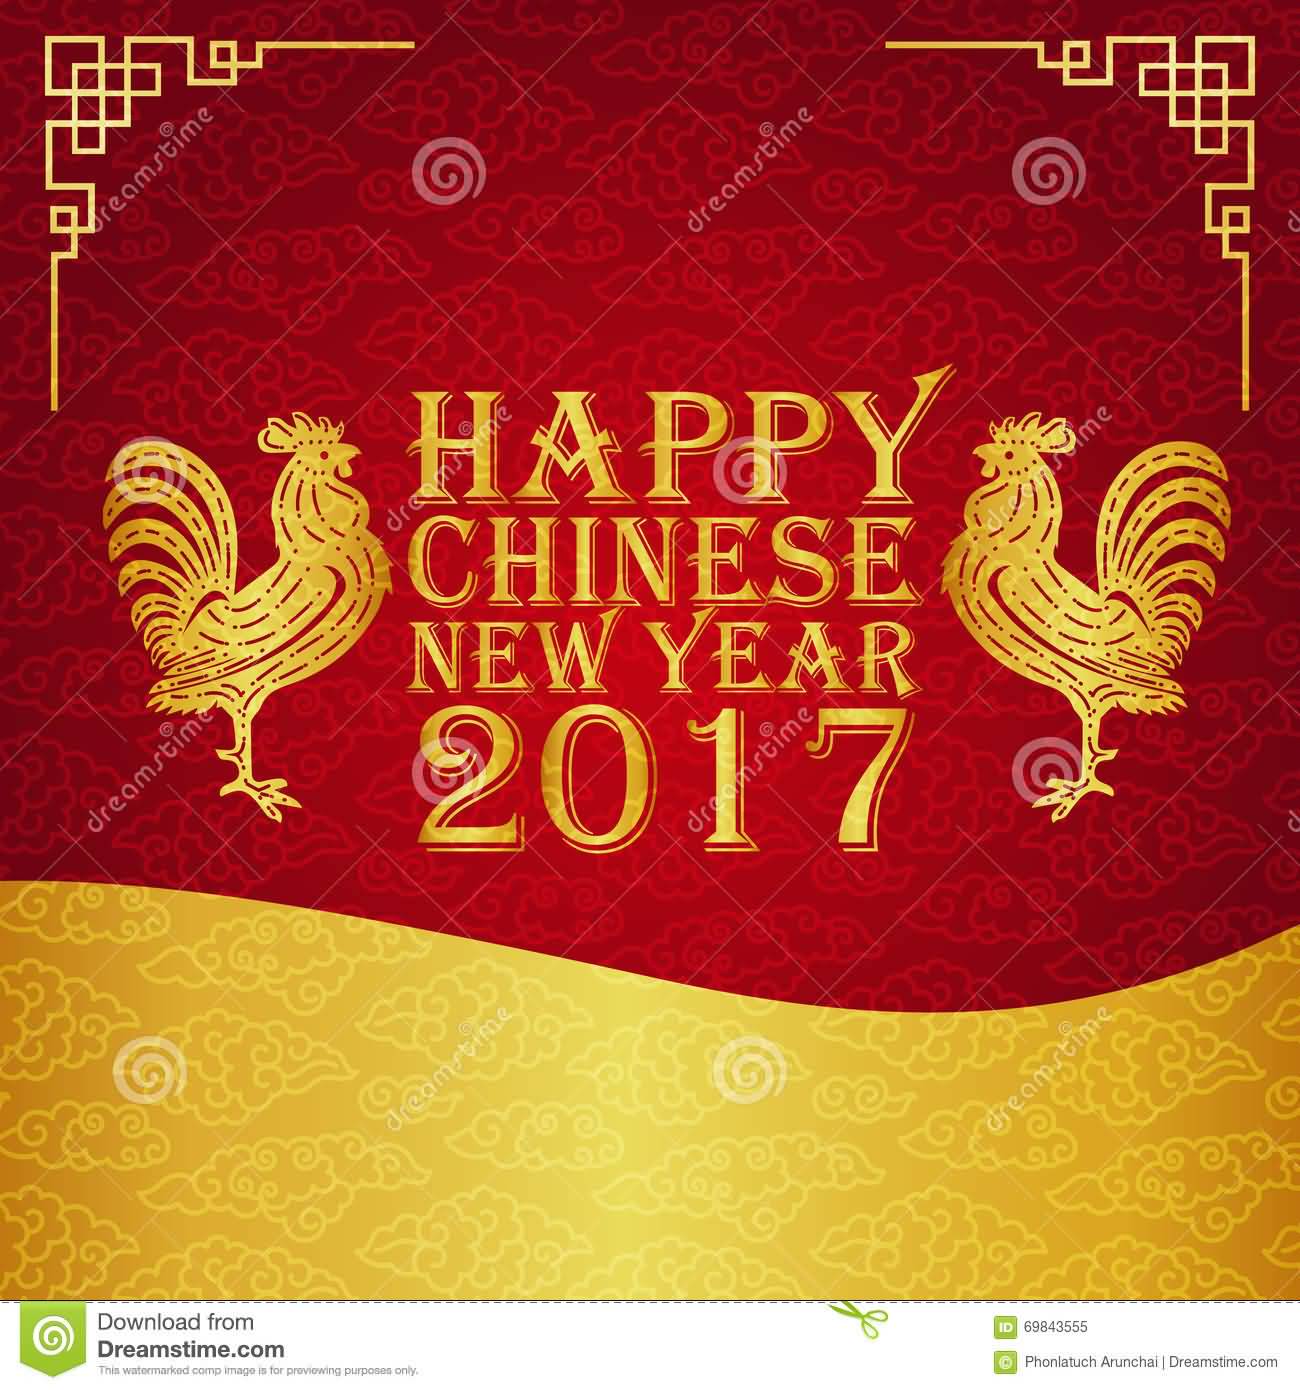 Happy Chinese New Year 2017 Two Roosters Greeting Card